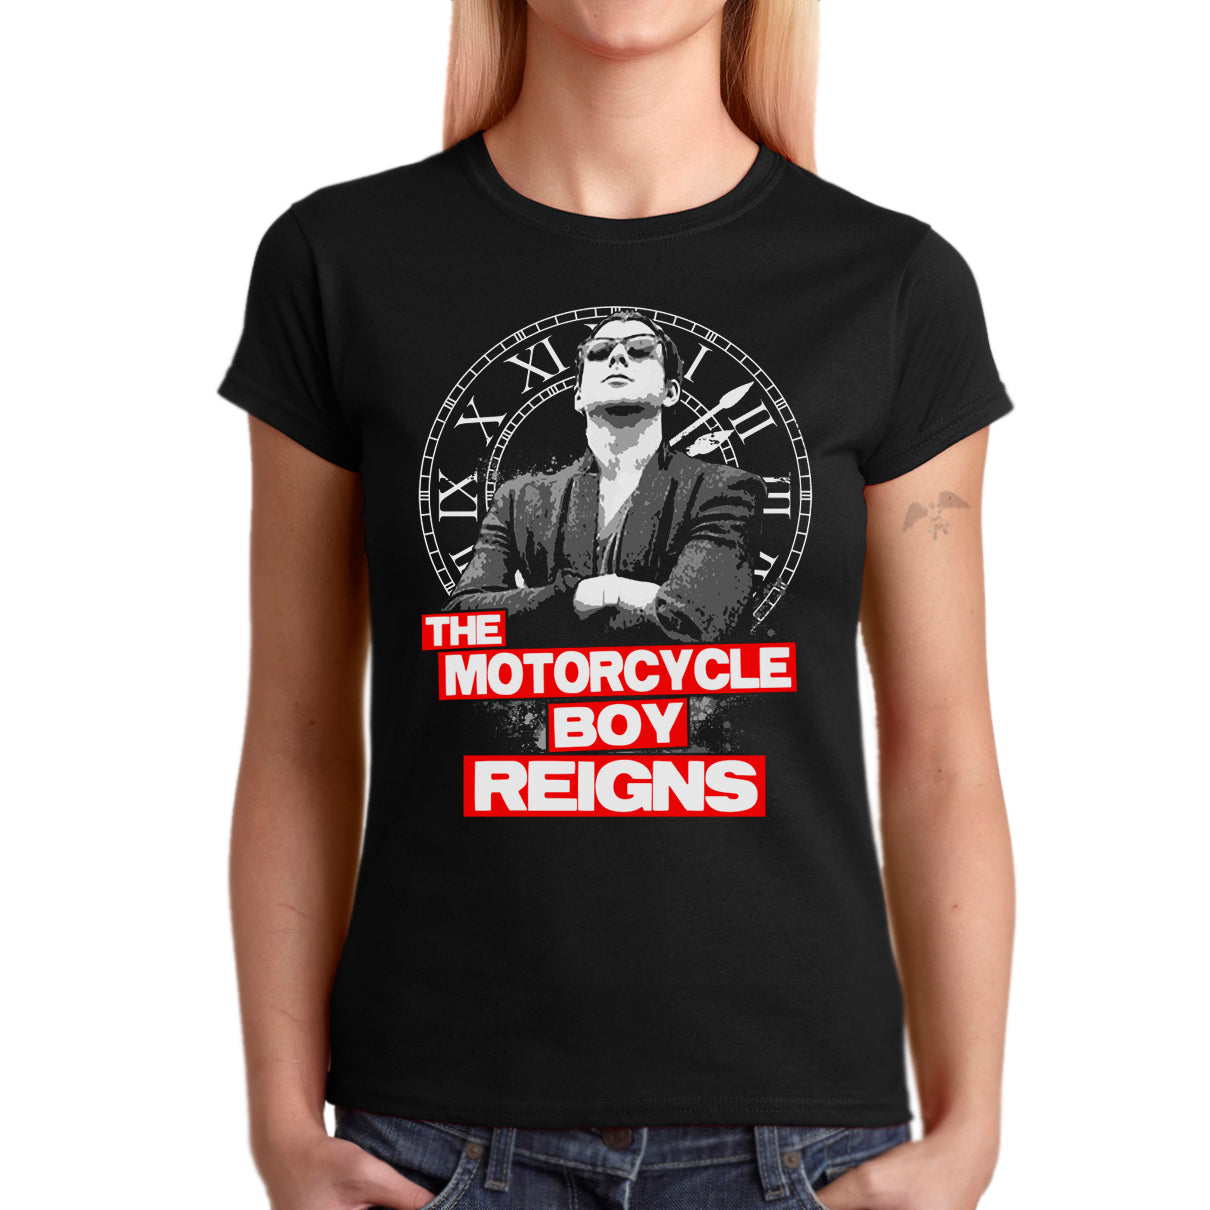 Rumble Fish inspired T-shirt The Motorcycle Boy